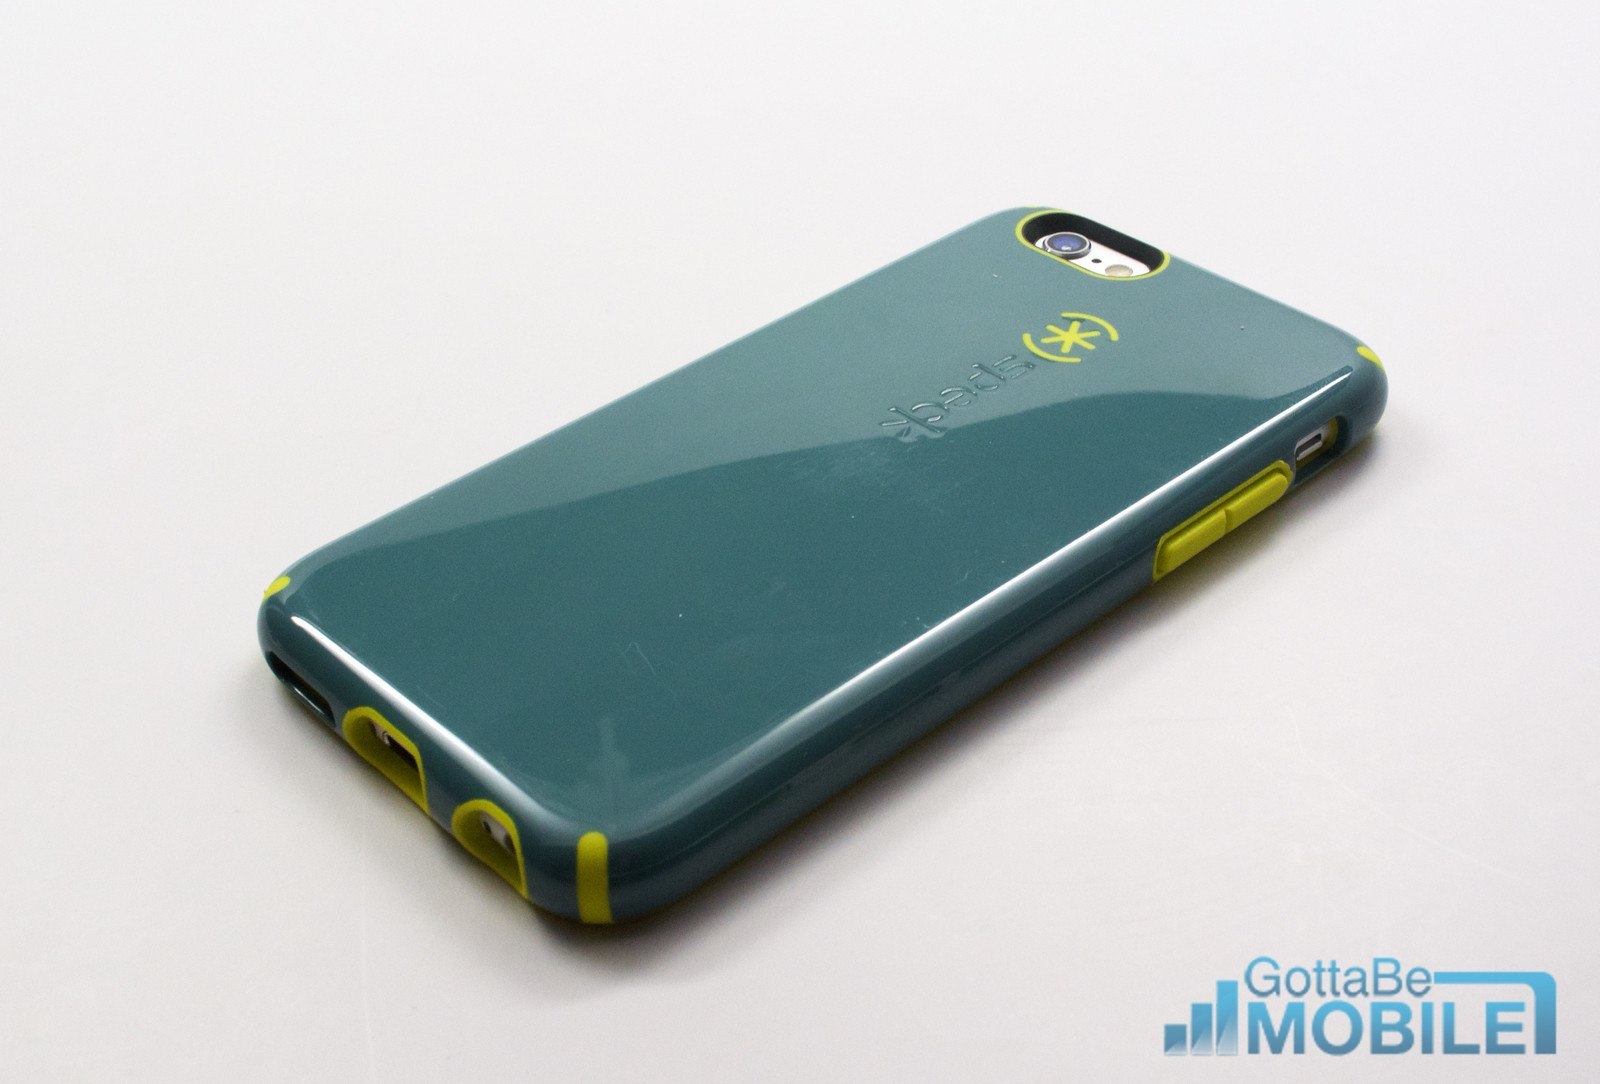 Read our Speck CandyShell iPhone 6 case review to see if this case is worth buying.